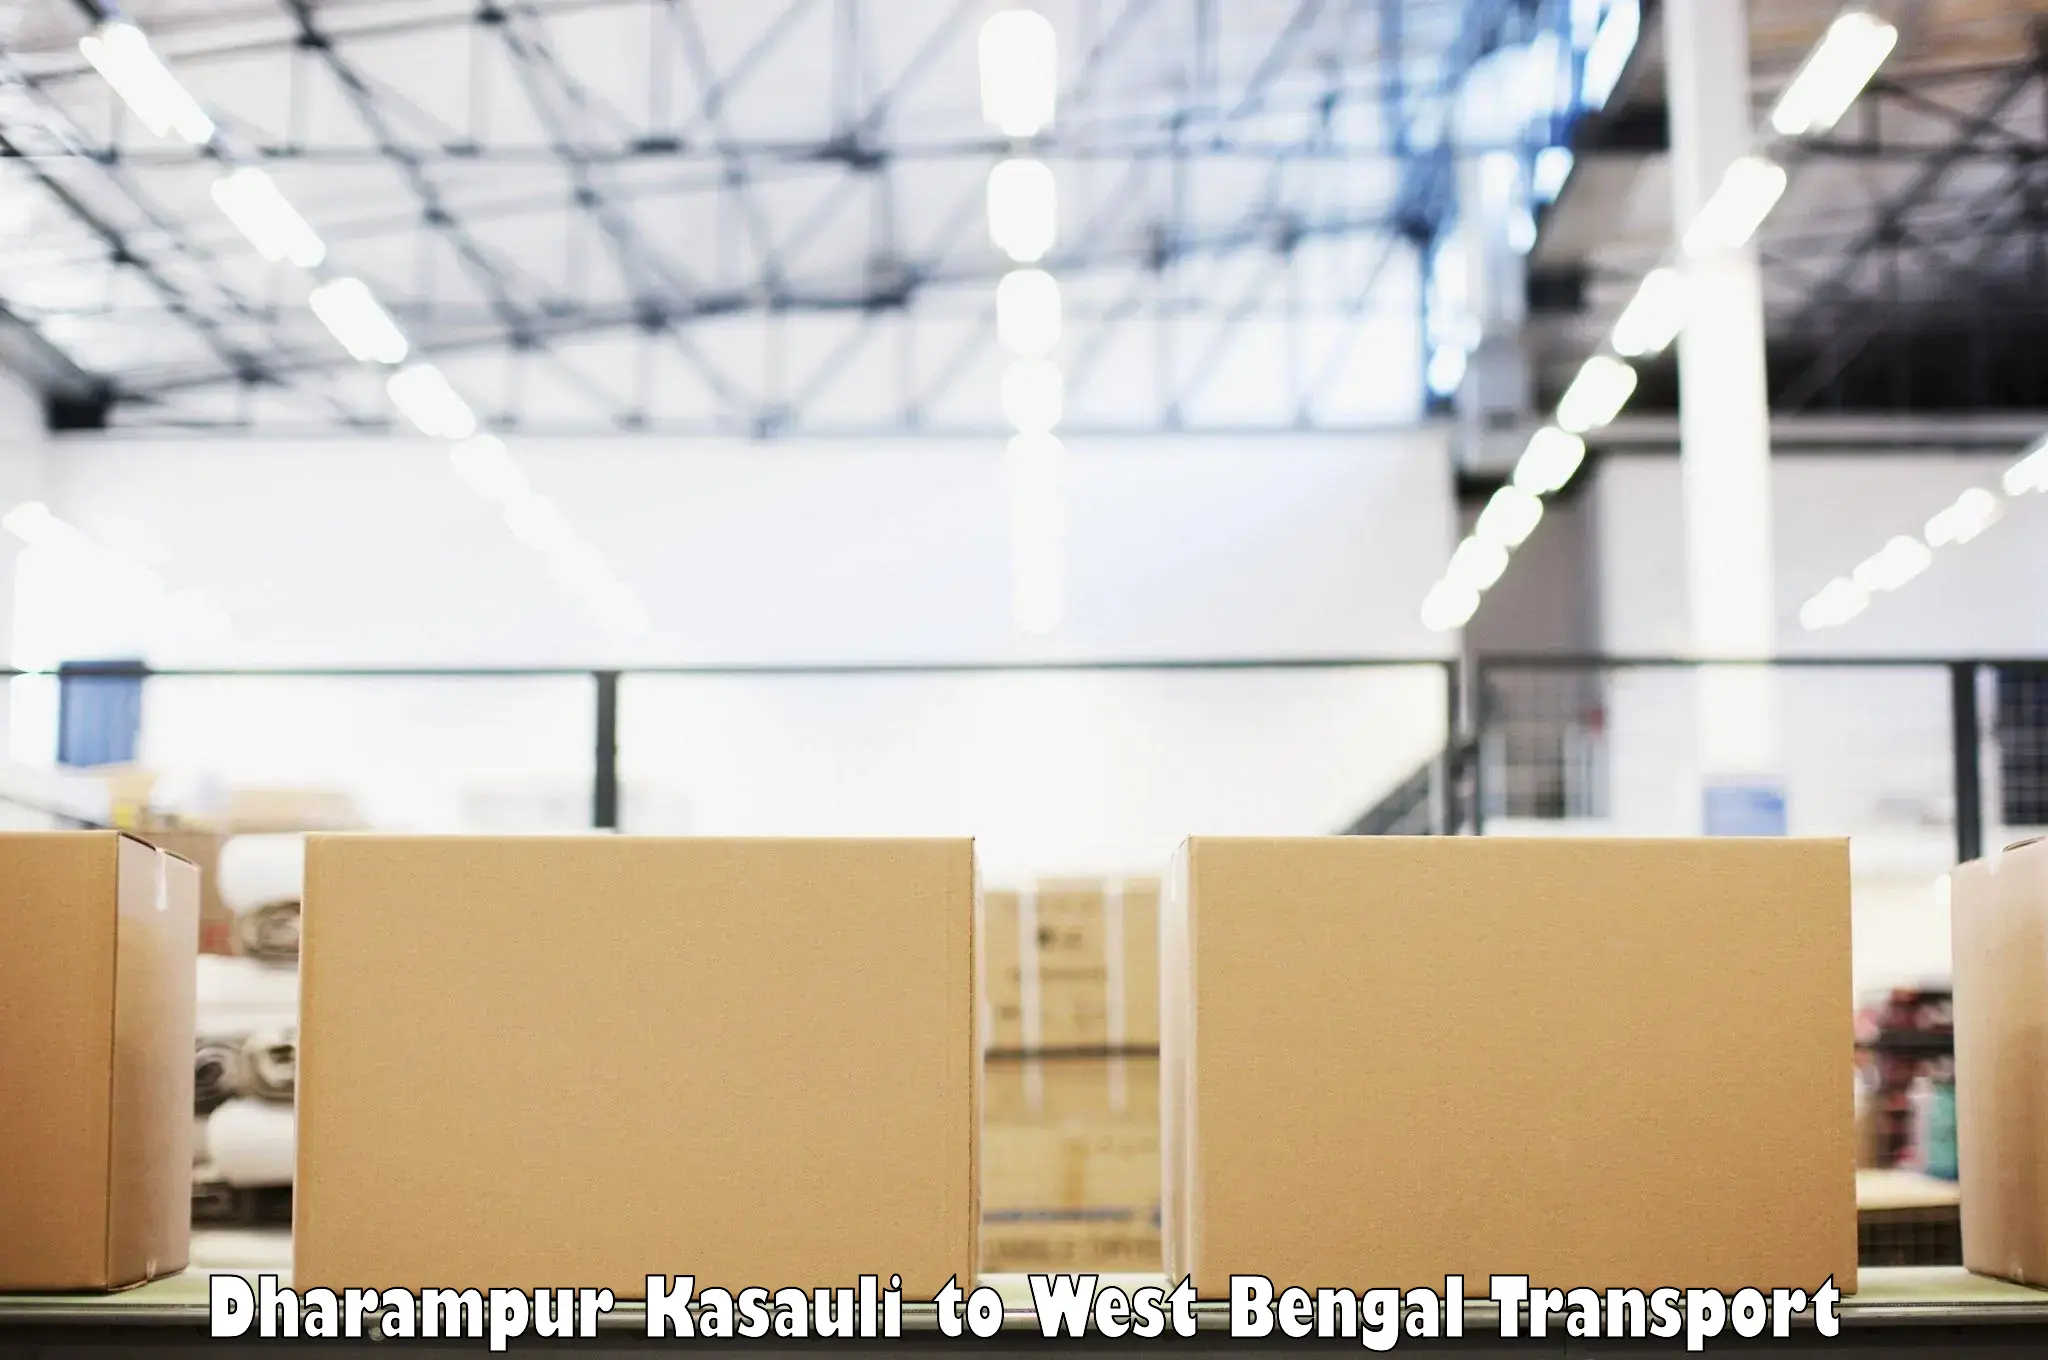 Container transport service Dharampur Kasauli to Midnapore